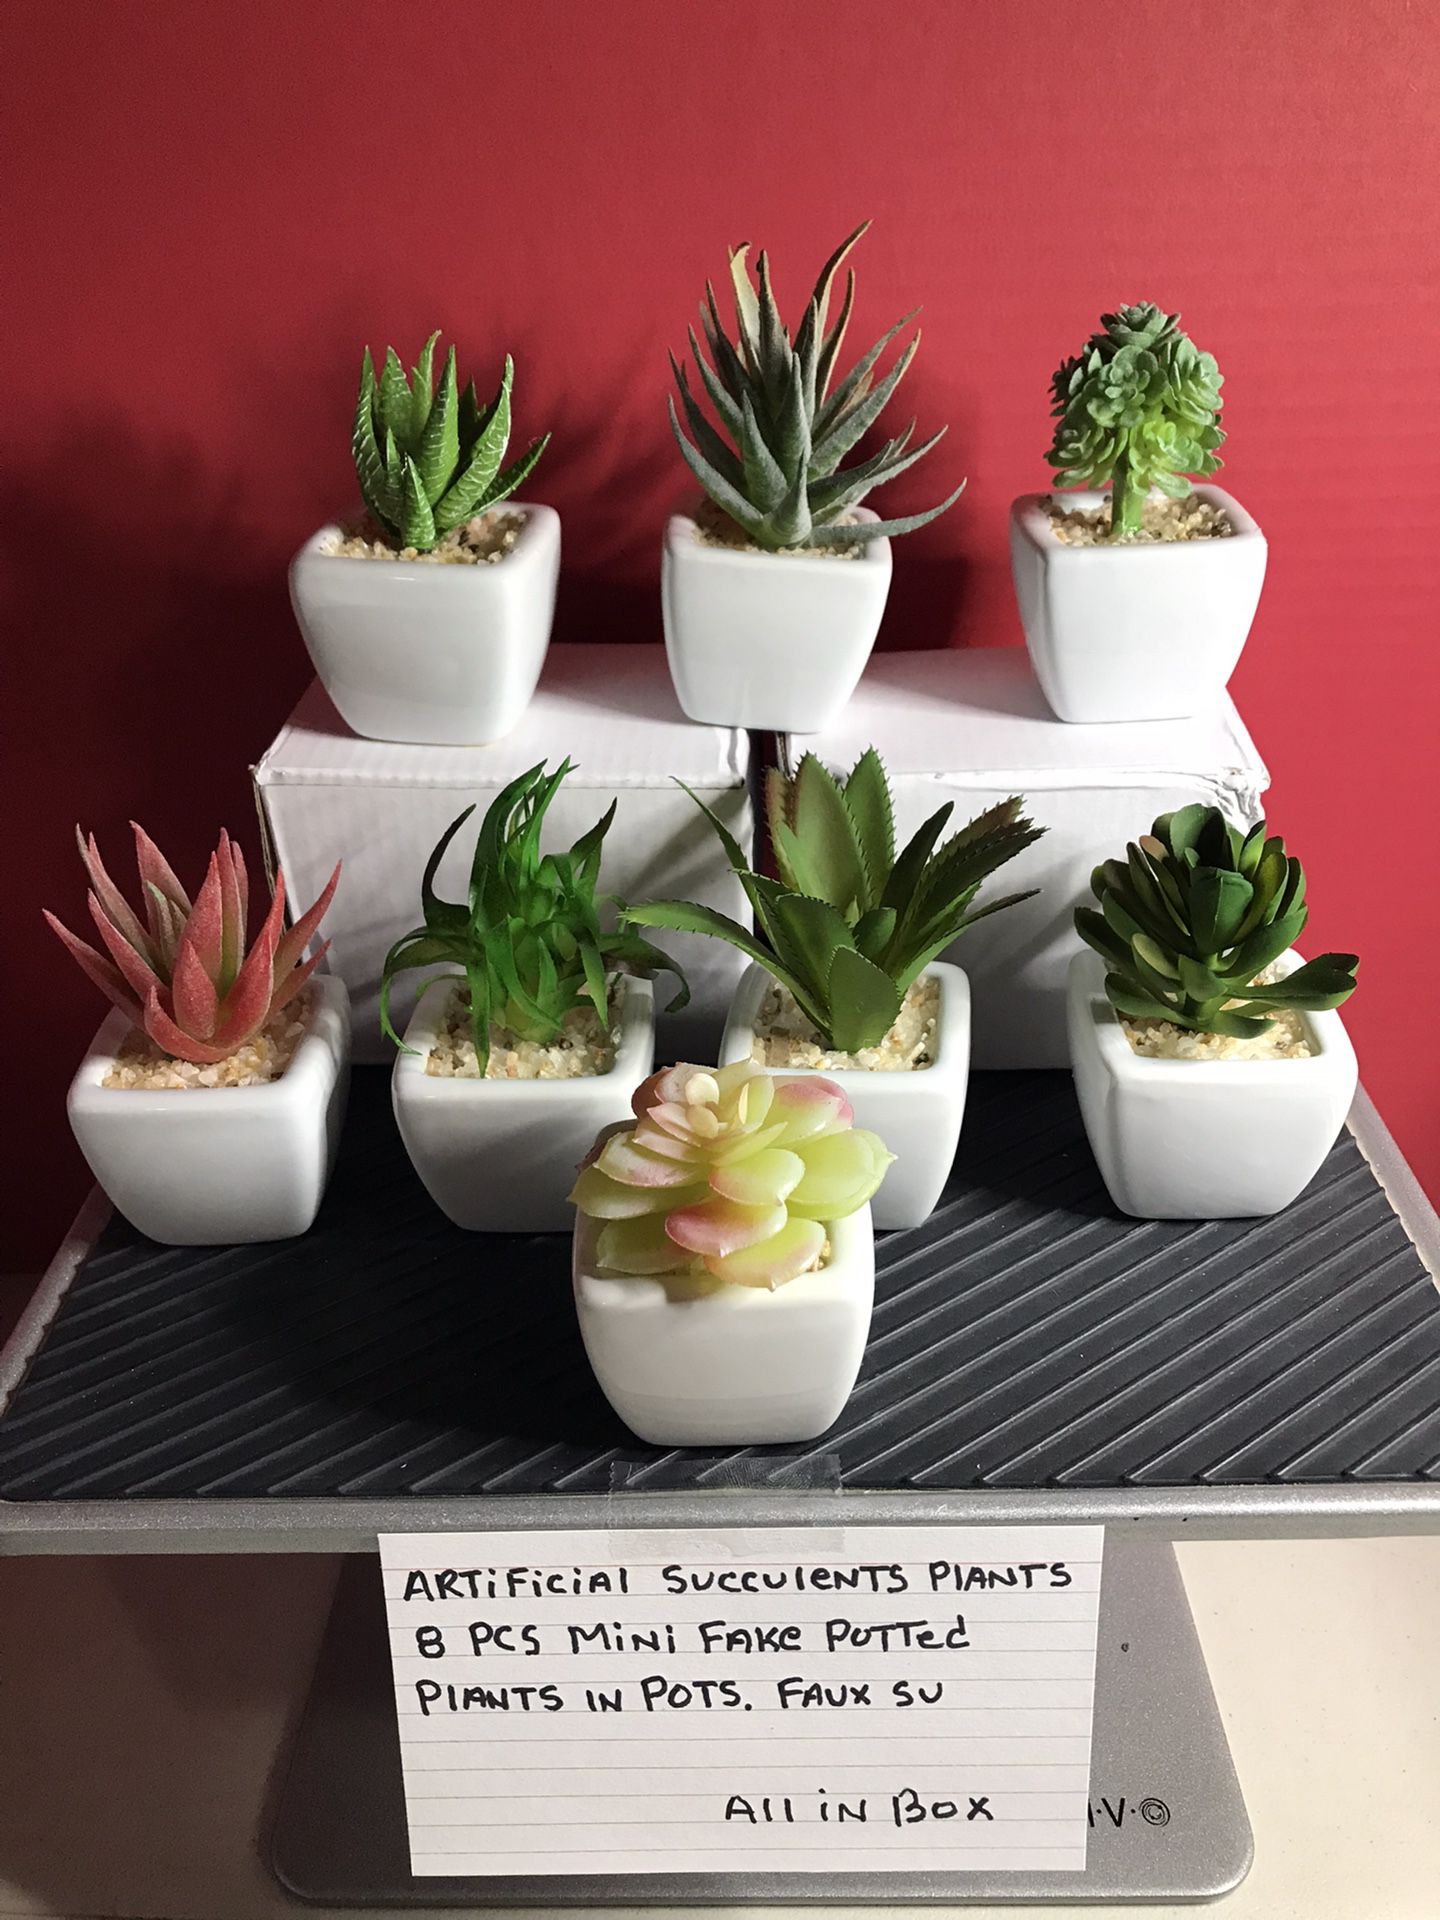 Artificial Succulents Plants 8 PCs Mini Fake Potted Plants In Pots Never Used